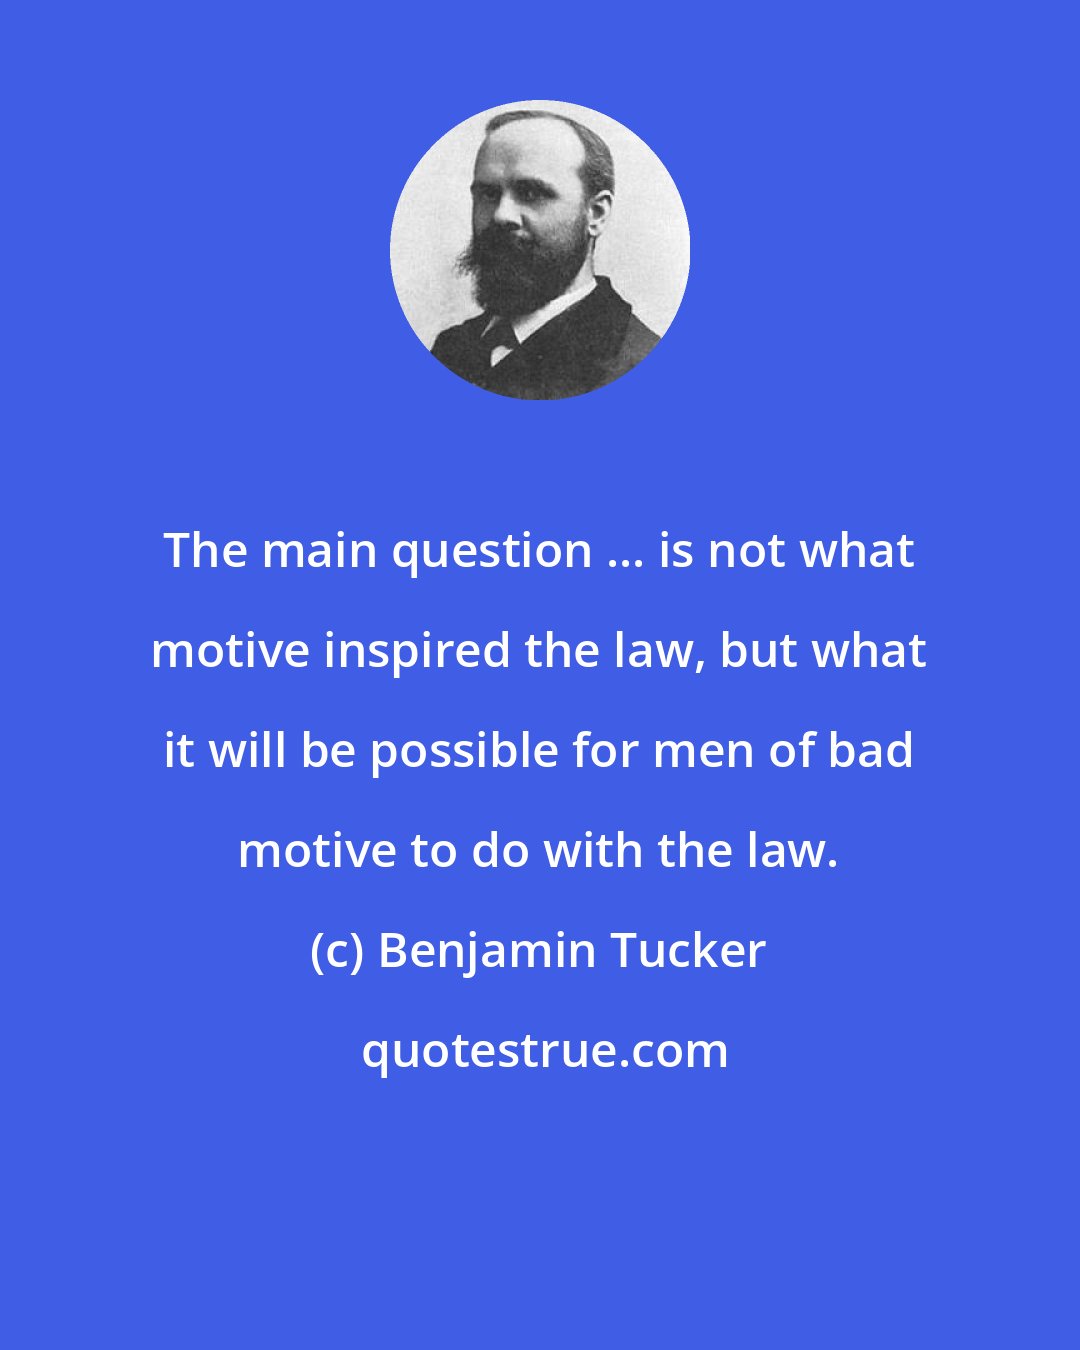 Benjamin Tucker: The main question ... is not what motive inspired the law, but what it will be possible for men of bad motive to do with the law.